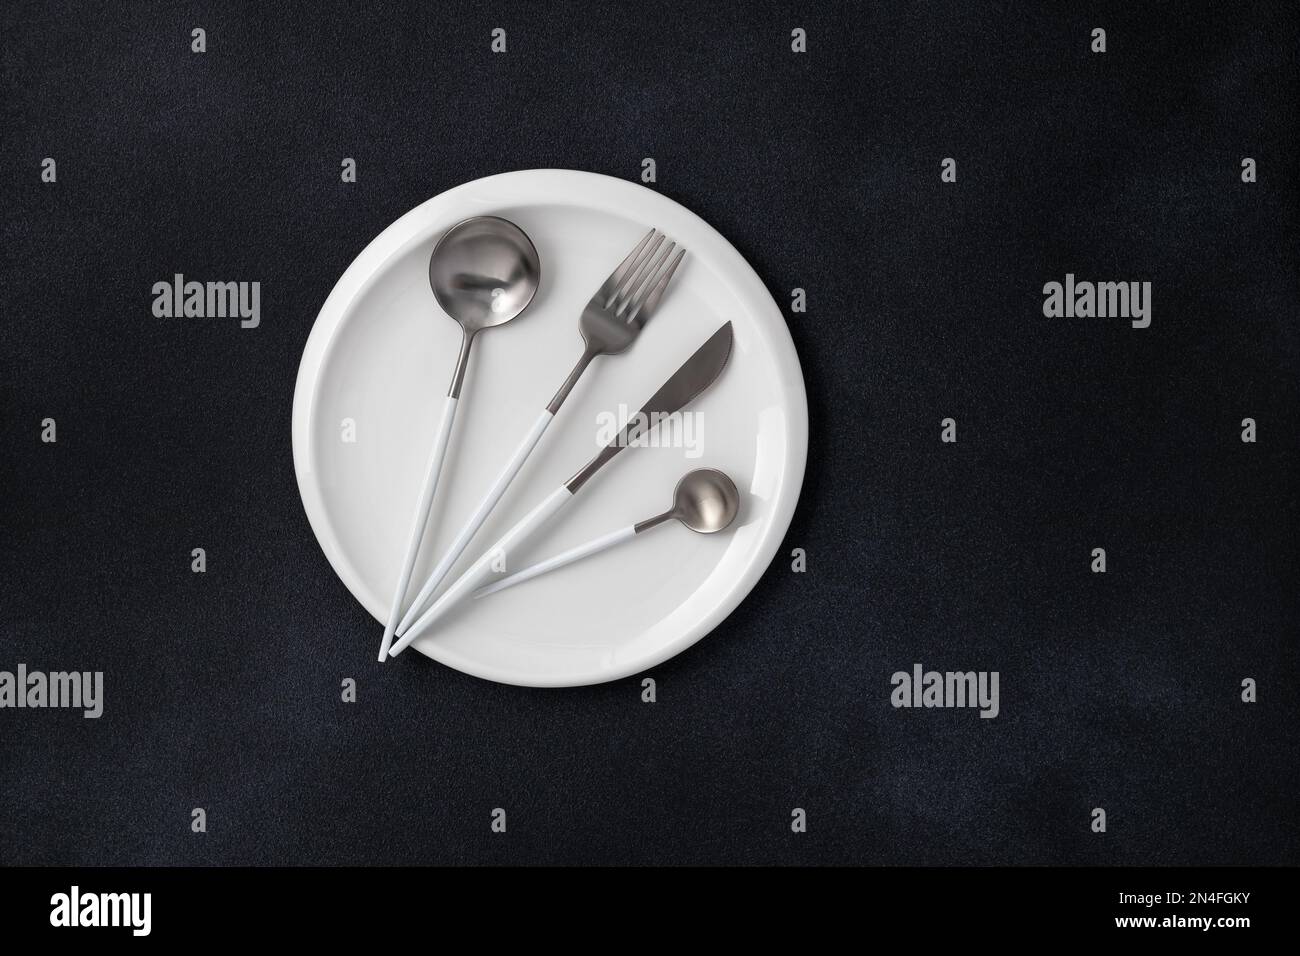 White plate and steel cutlery on a black grunge background. Top view. Card or menu template, flat design. Tableware, crockery. Aerial view, copy space Stock Photo